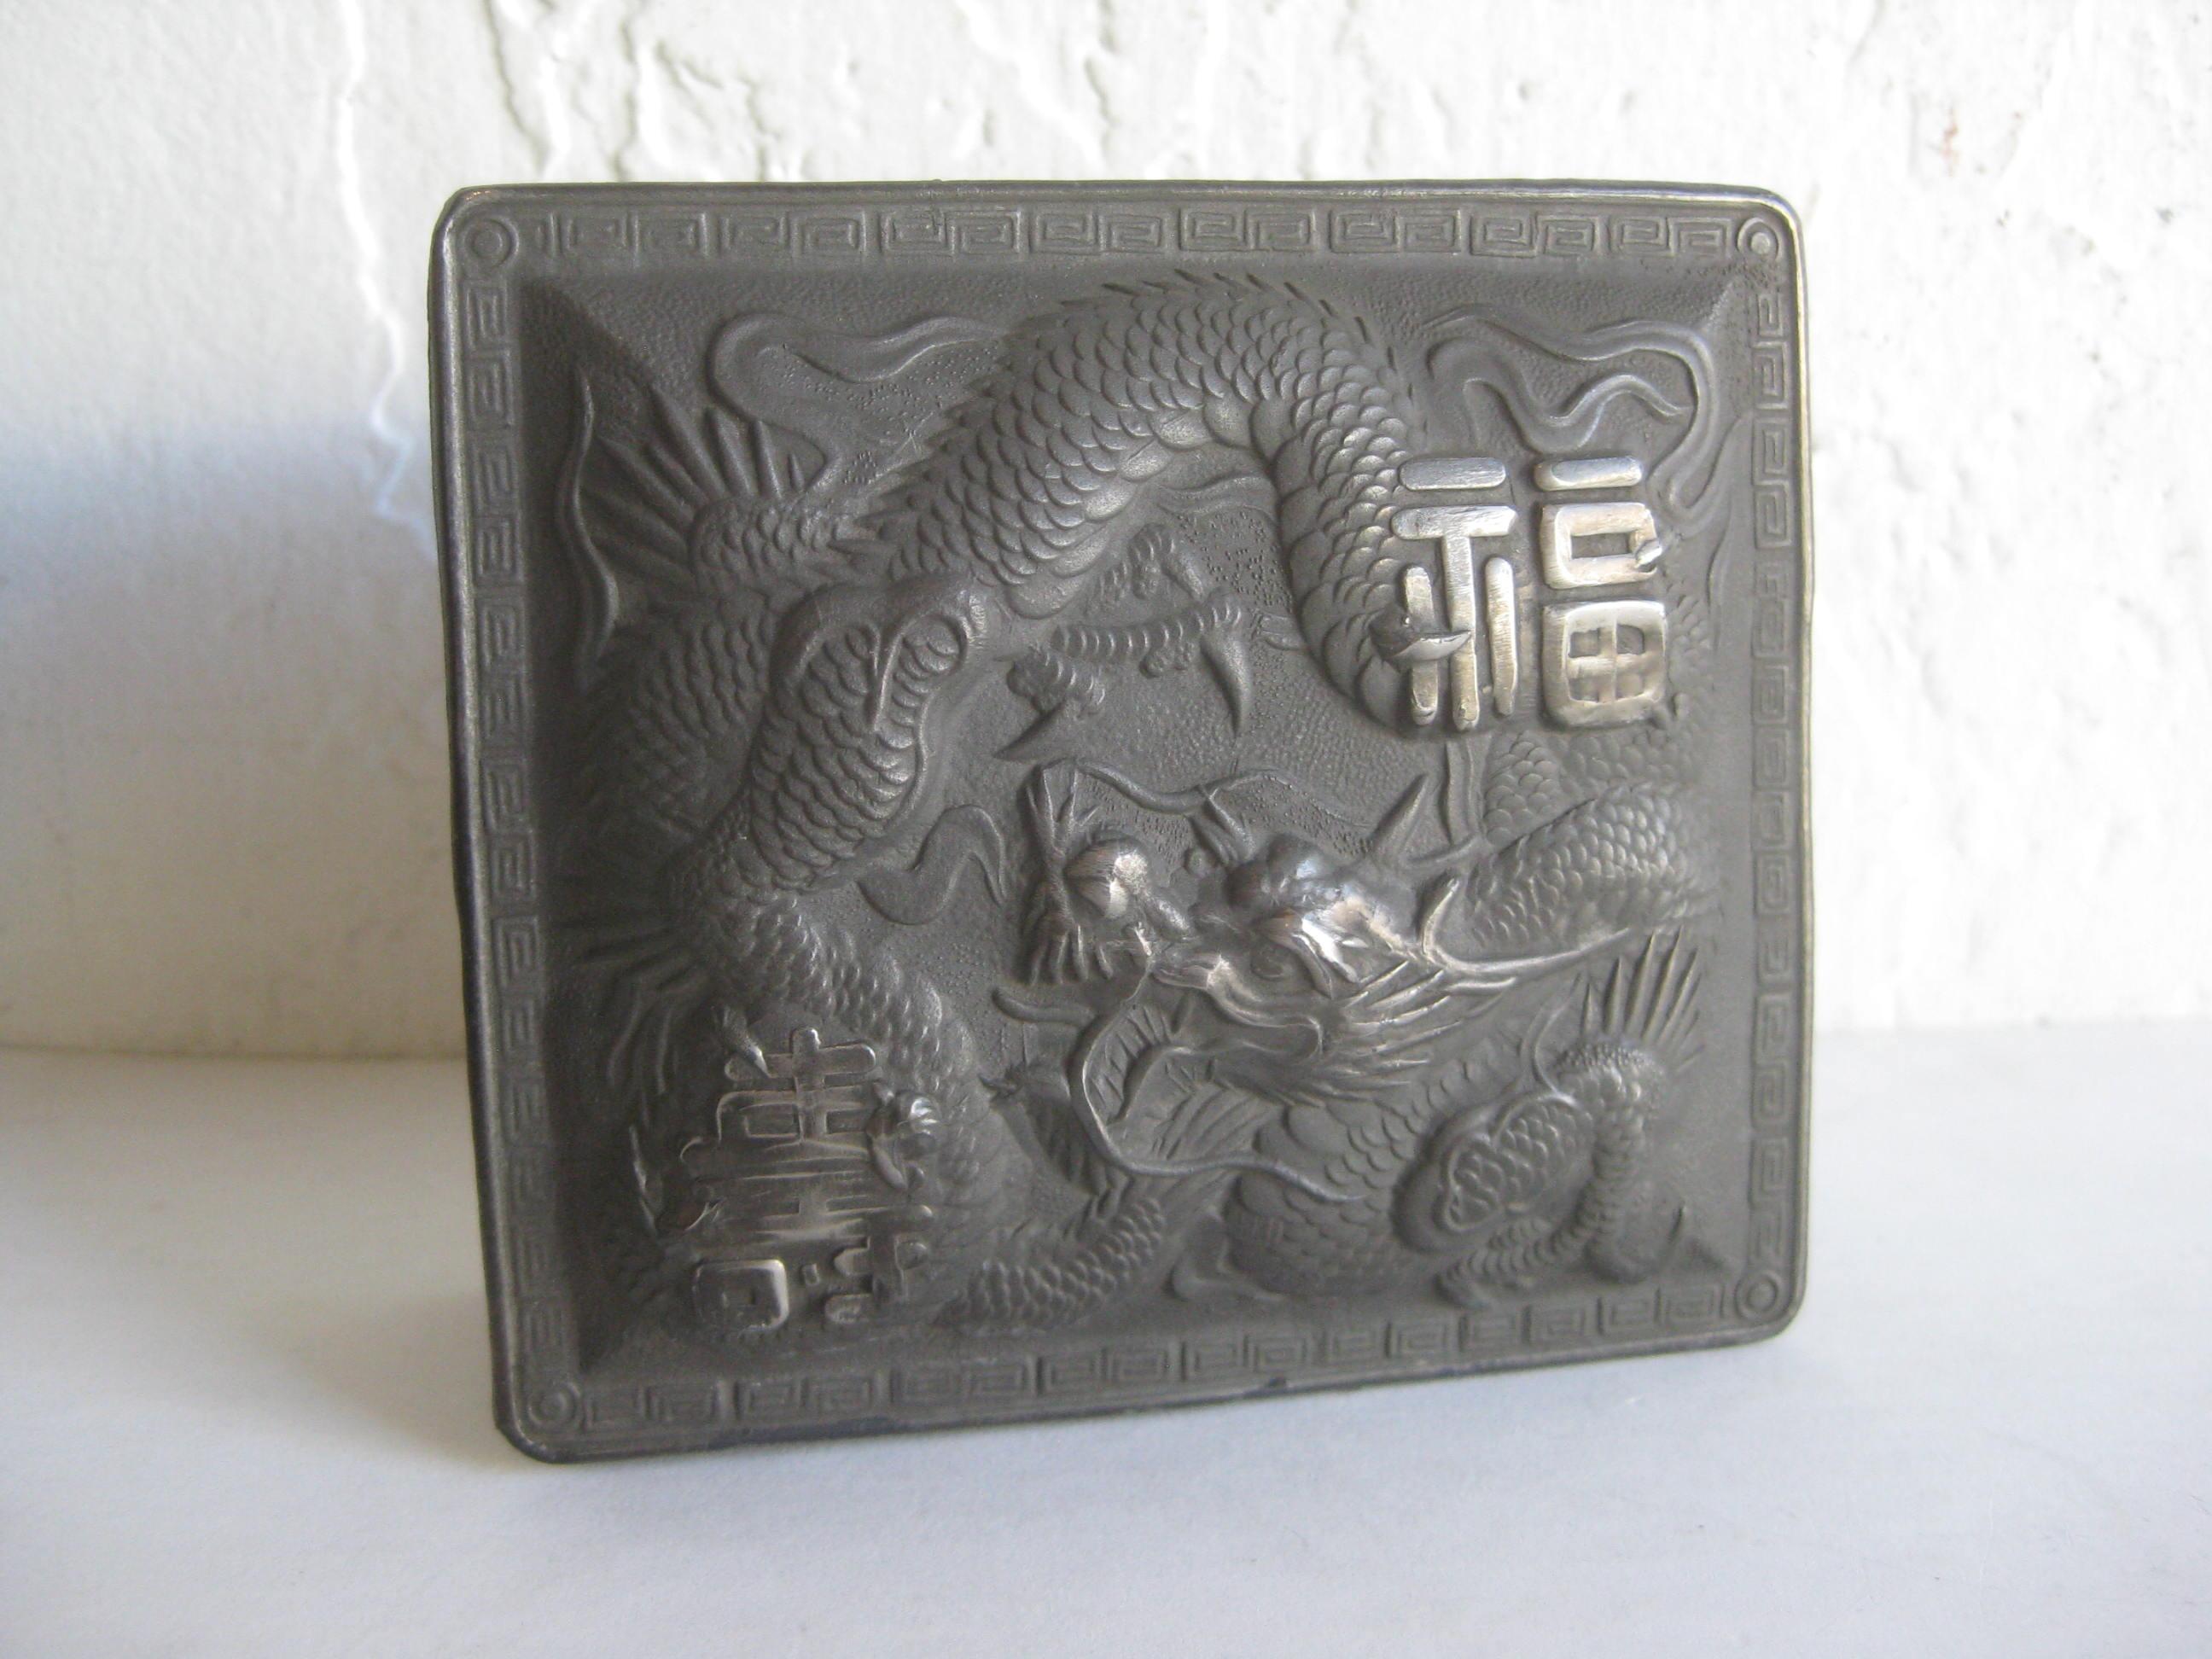 Great antique Japanese metal relief stash/cigarette box. Has a dragon design on the lid and then on the sides of the box. Marked 